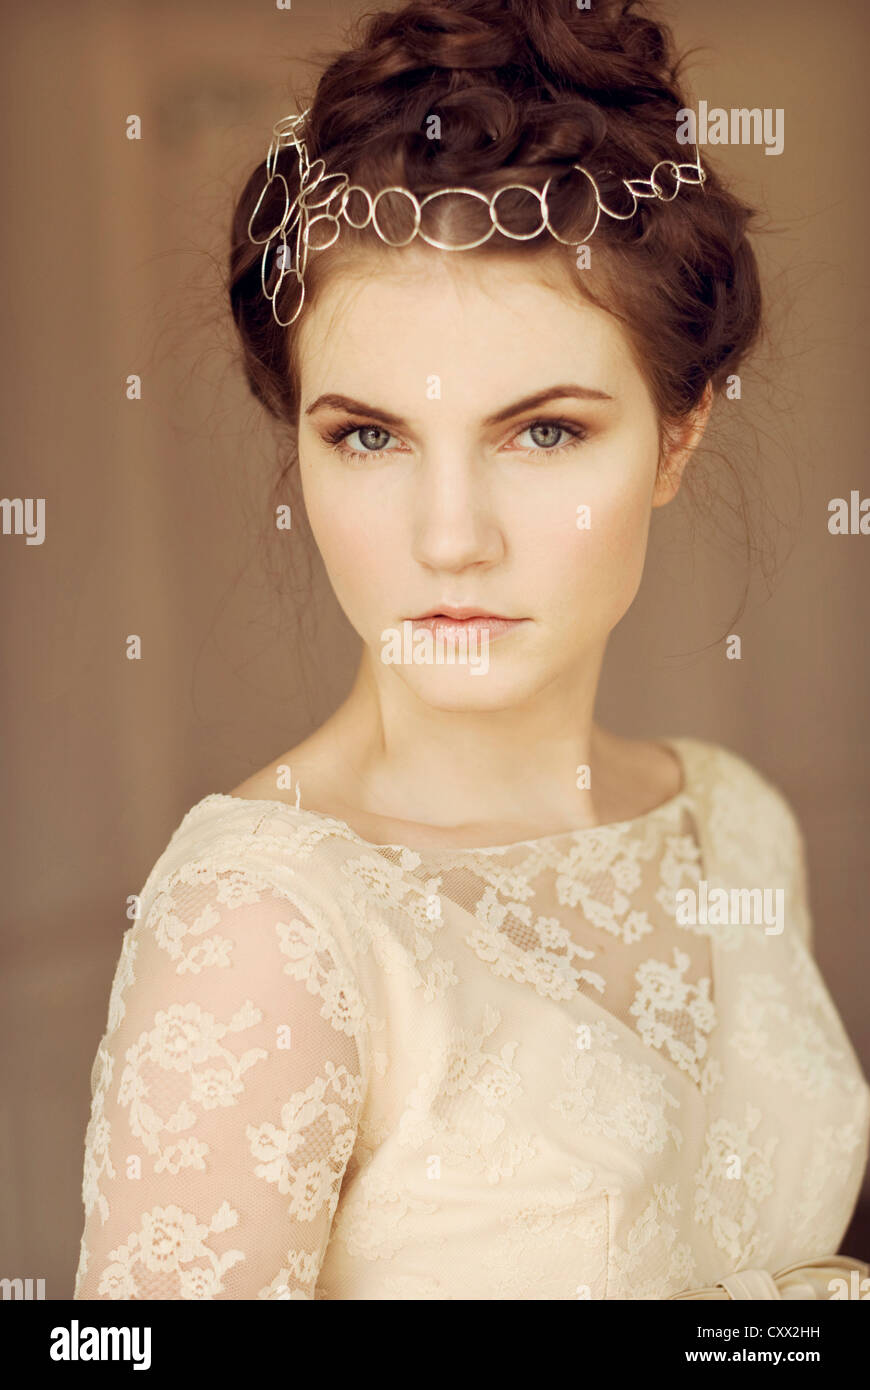 Portrait of young woman with sterling silver headpiece and white lace dress looking straight forward Stock Photo